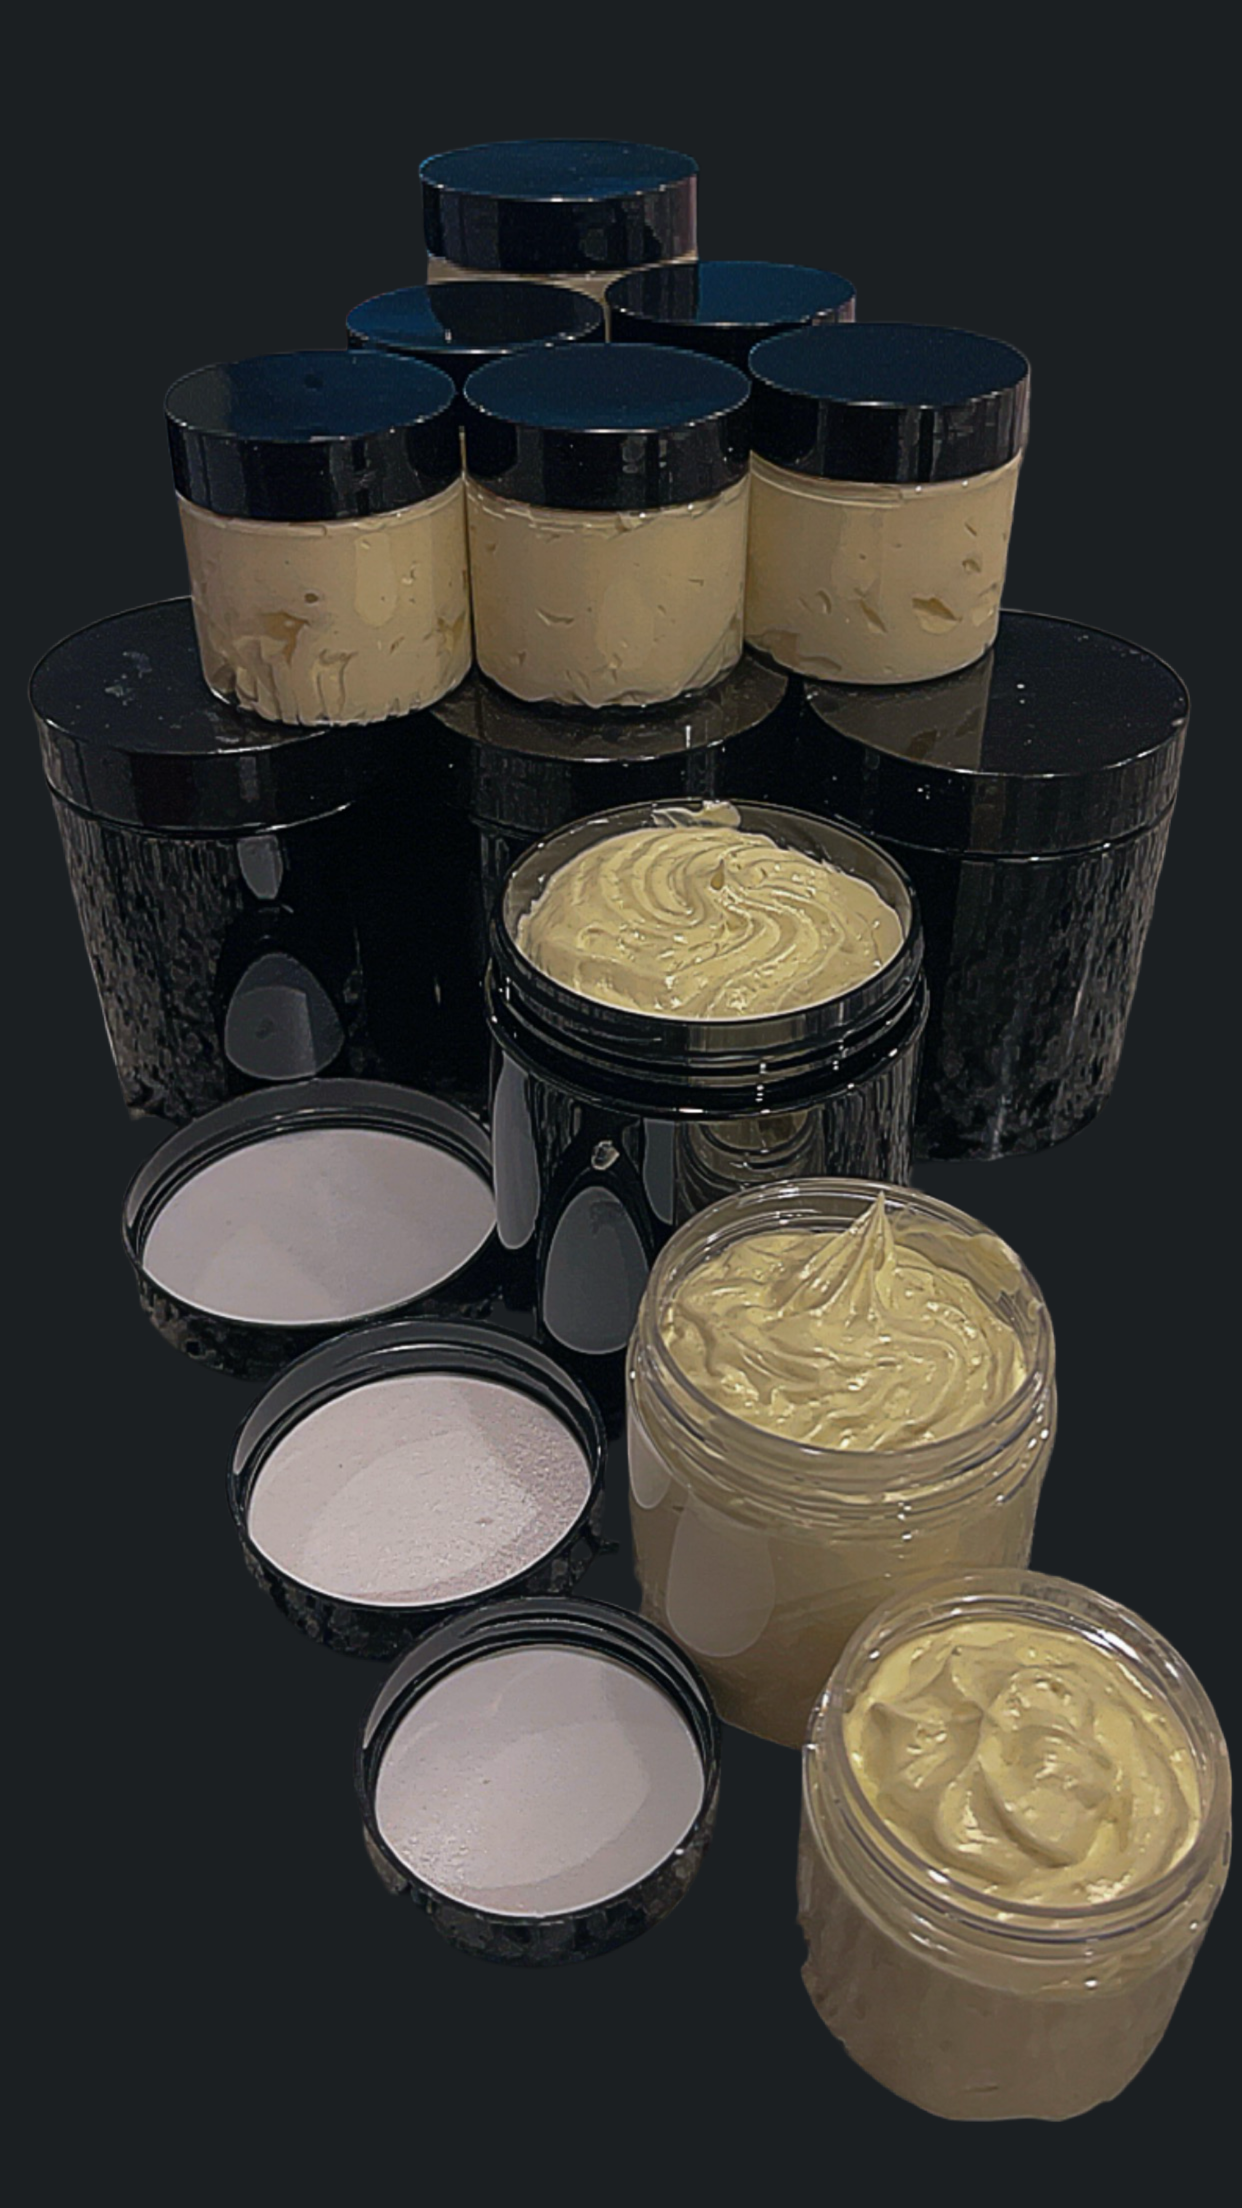 Body Butter: Skin therapy for dry skin.